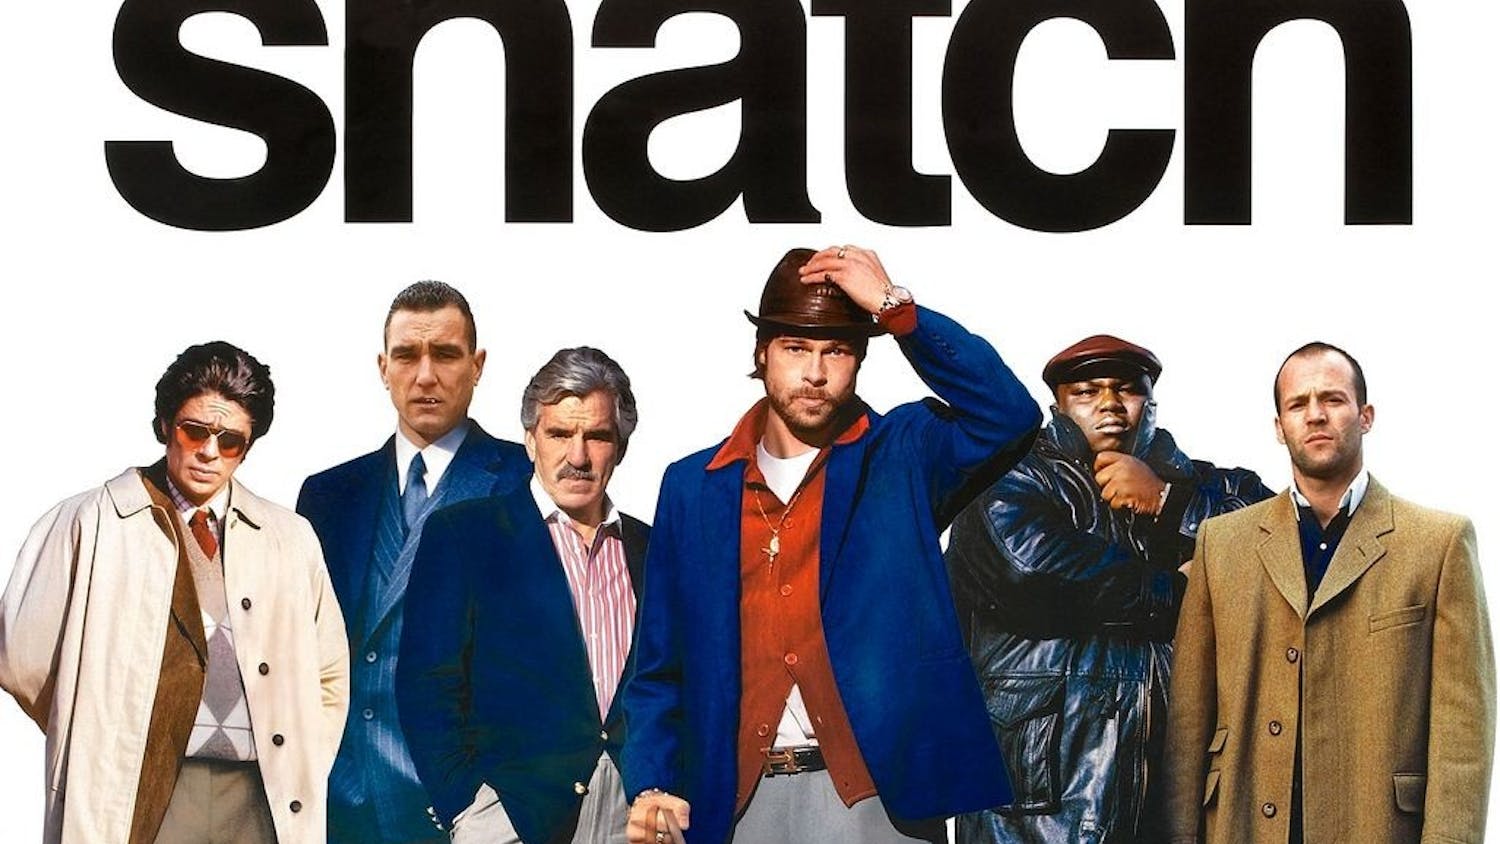 Released at the dawn of the new millennium, “Snatch” is sure to delight and confuse.

